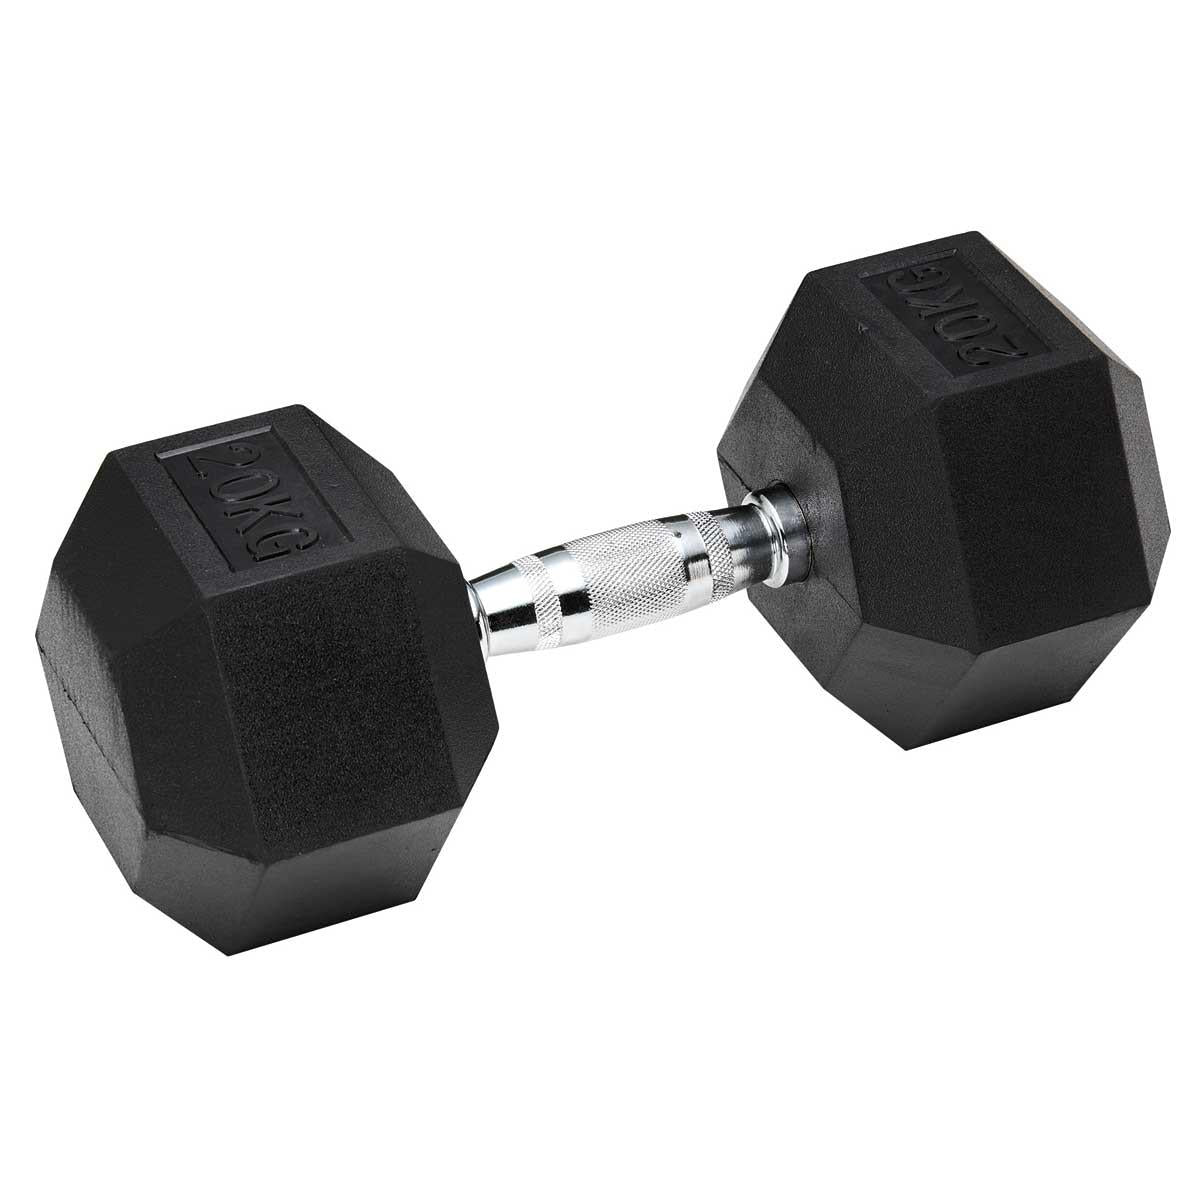 1441 Fitness Hex Dumbbell Set 2.5 to 20 KG (8 Pairs) with 3 Tier Dumbbell Rack – Strength Training Equipment